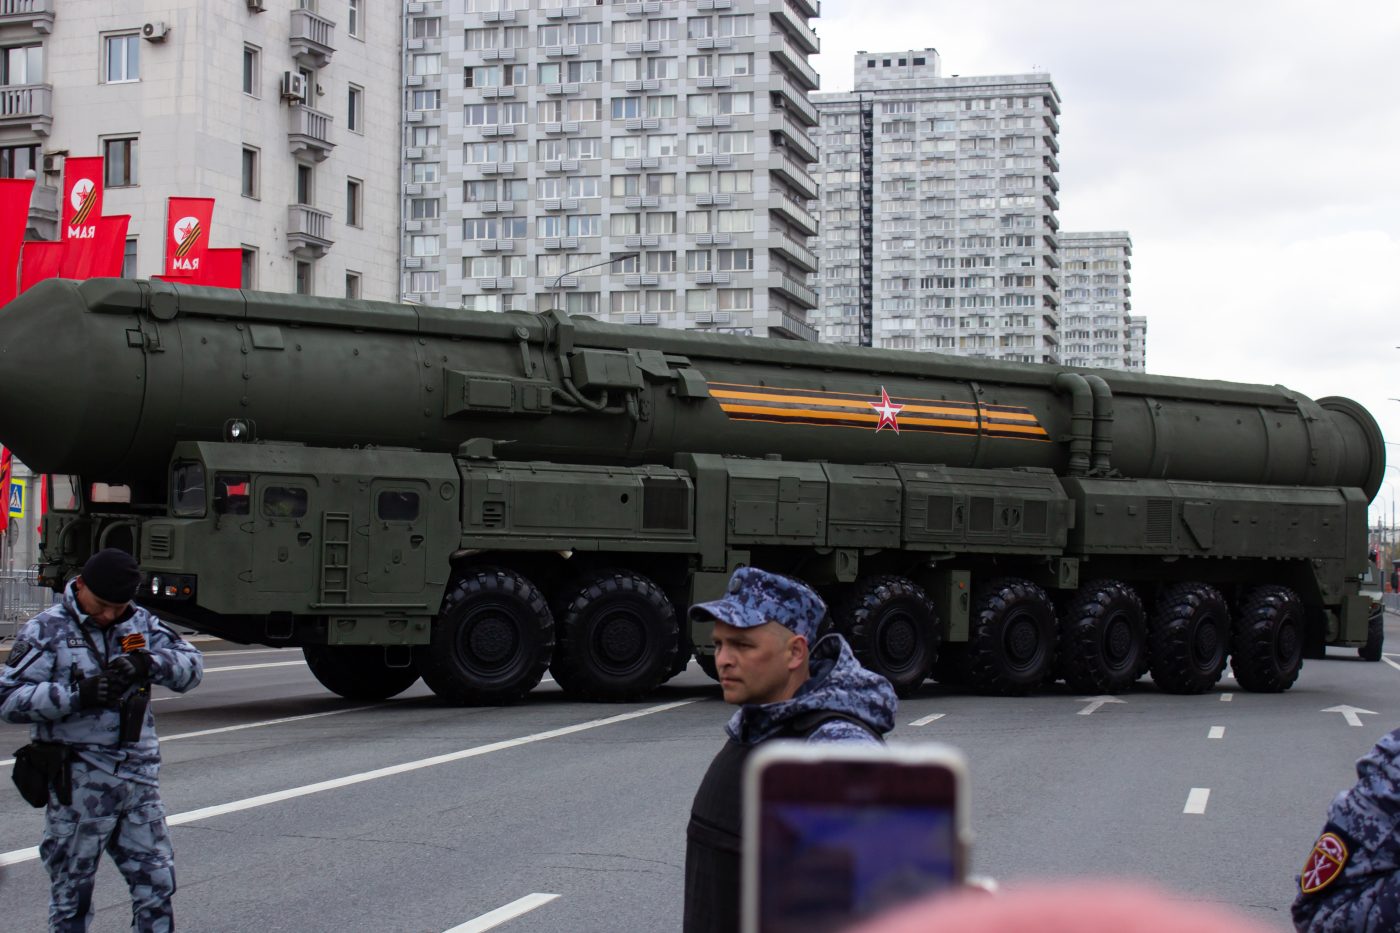 Photo: RS-24 Yars, a Russian MIRV-equipped thermonuclear armed intercontinental ballistic missile. The MIRV system permits a single missile to deliver multiple nuclear warheads to different targets. is seen in central Moscow during the general rehearsal of the Victory Day parade held on May 7, 2023. Credit: Vlad Karkov / SOPA Images/Sipa USA